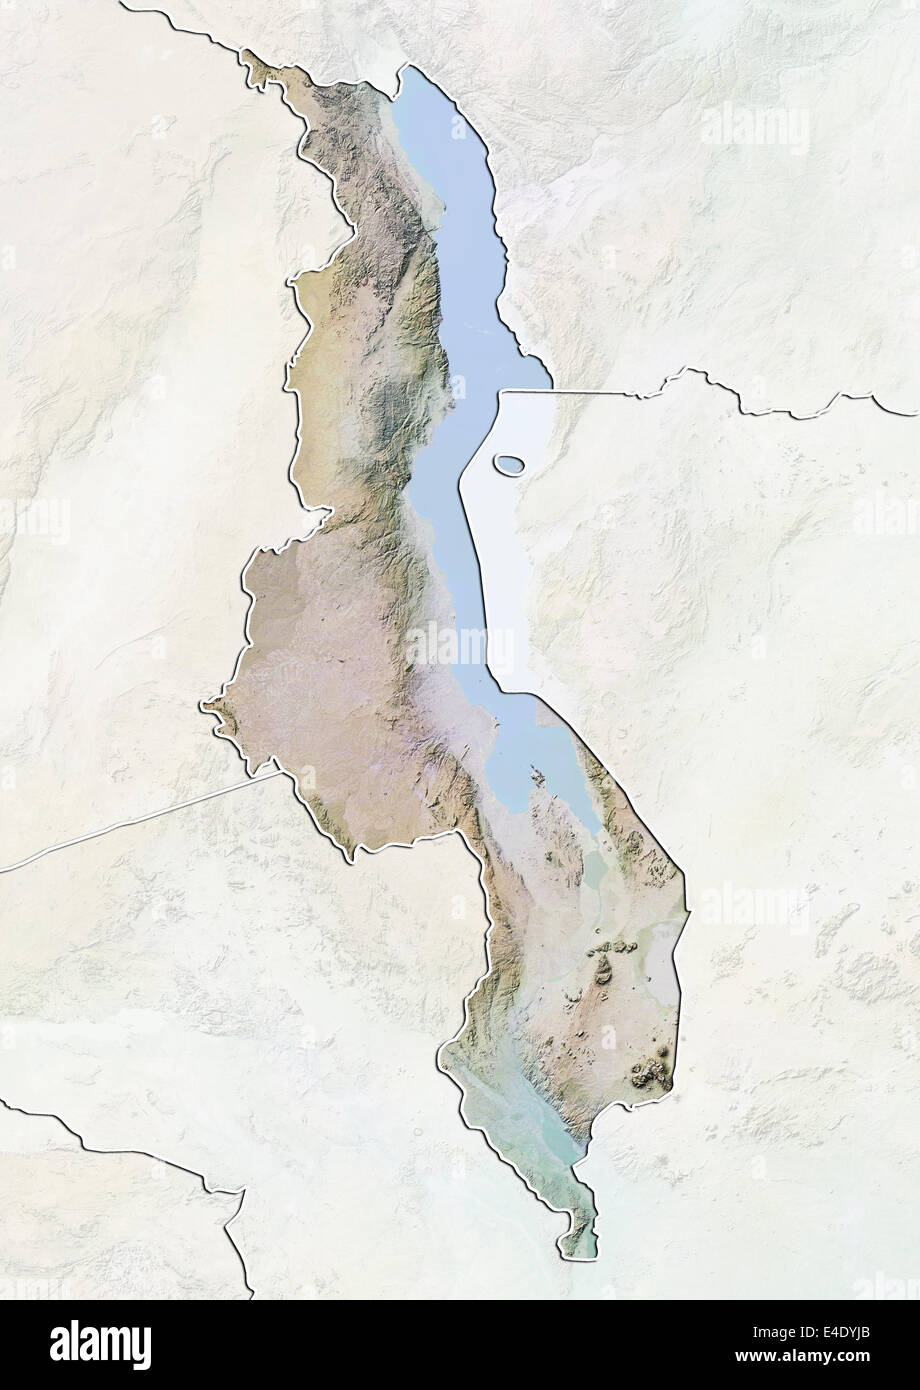 Malawi, Relief Map With Border and Mask Stock Photo